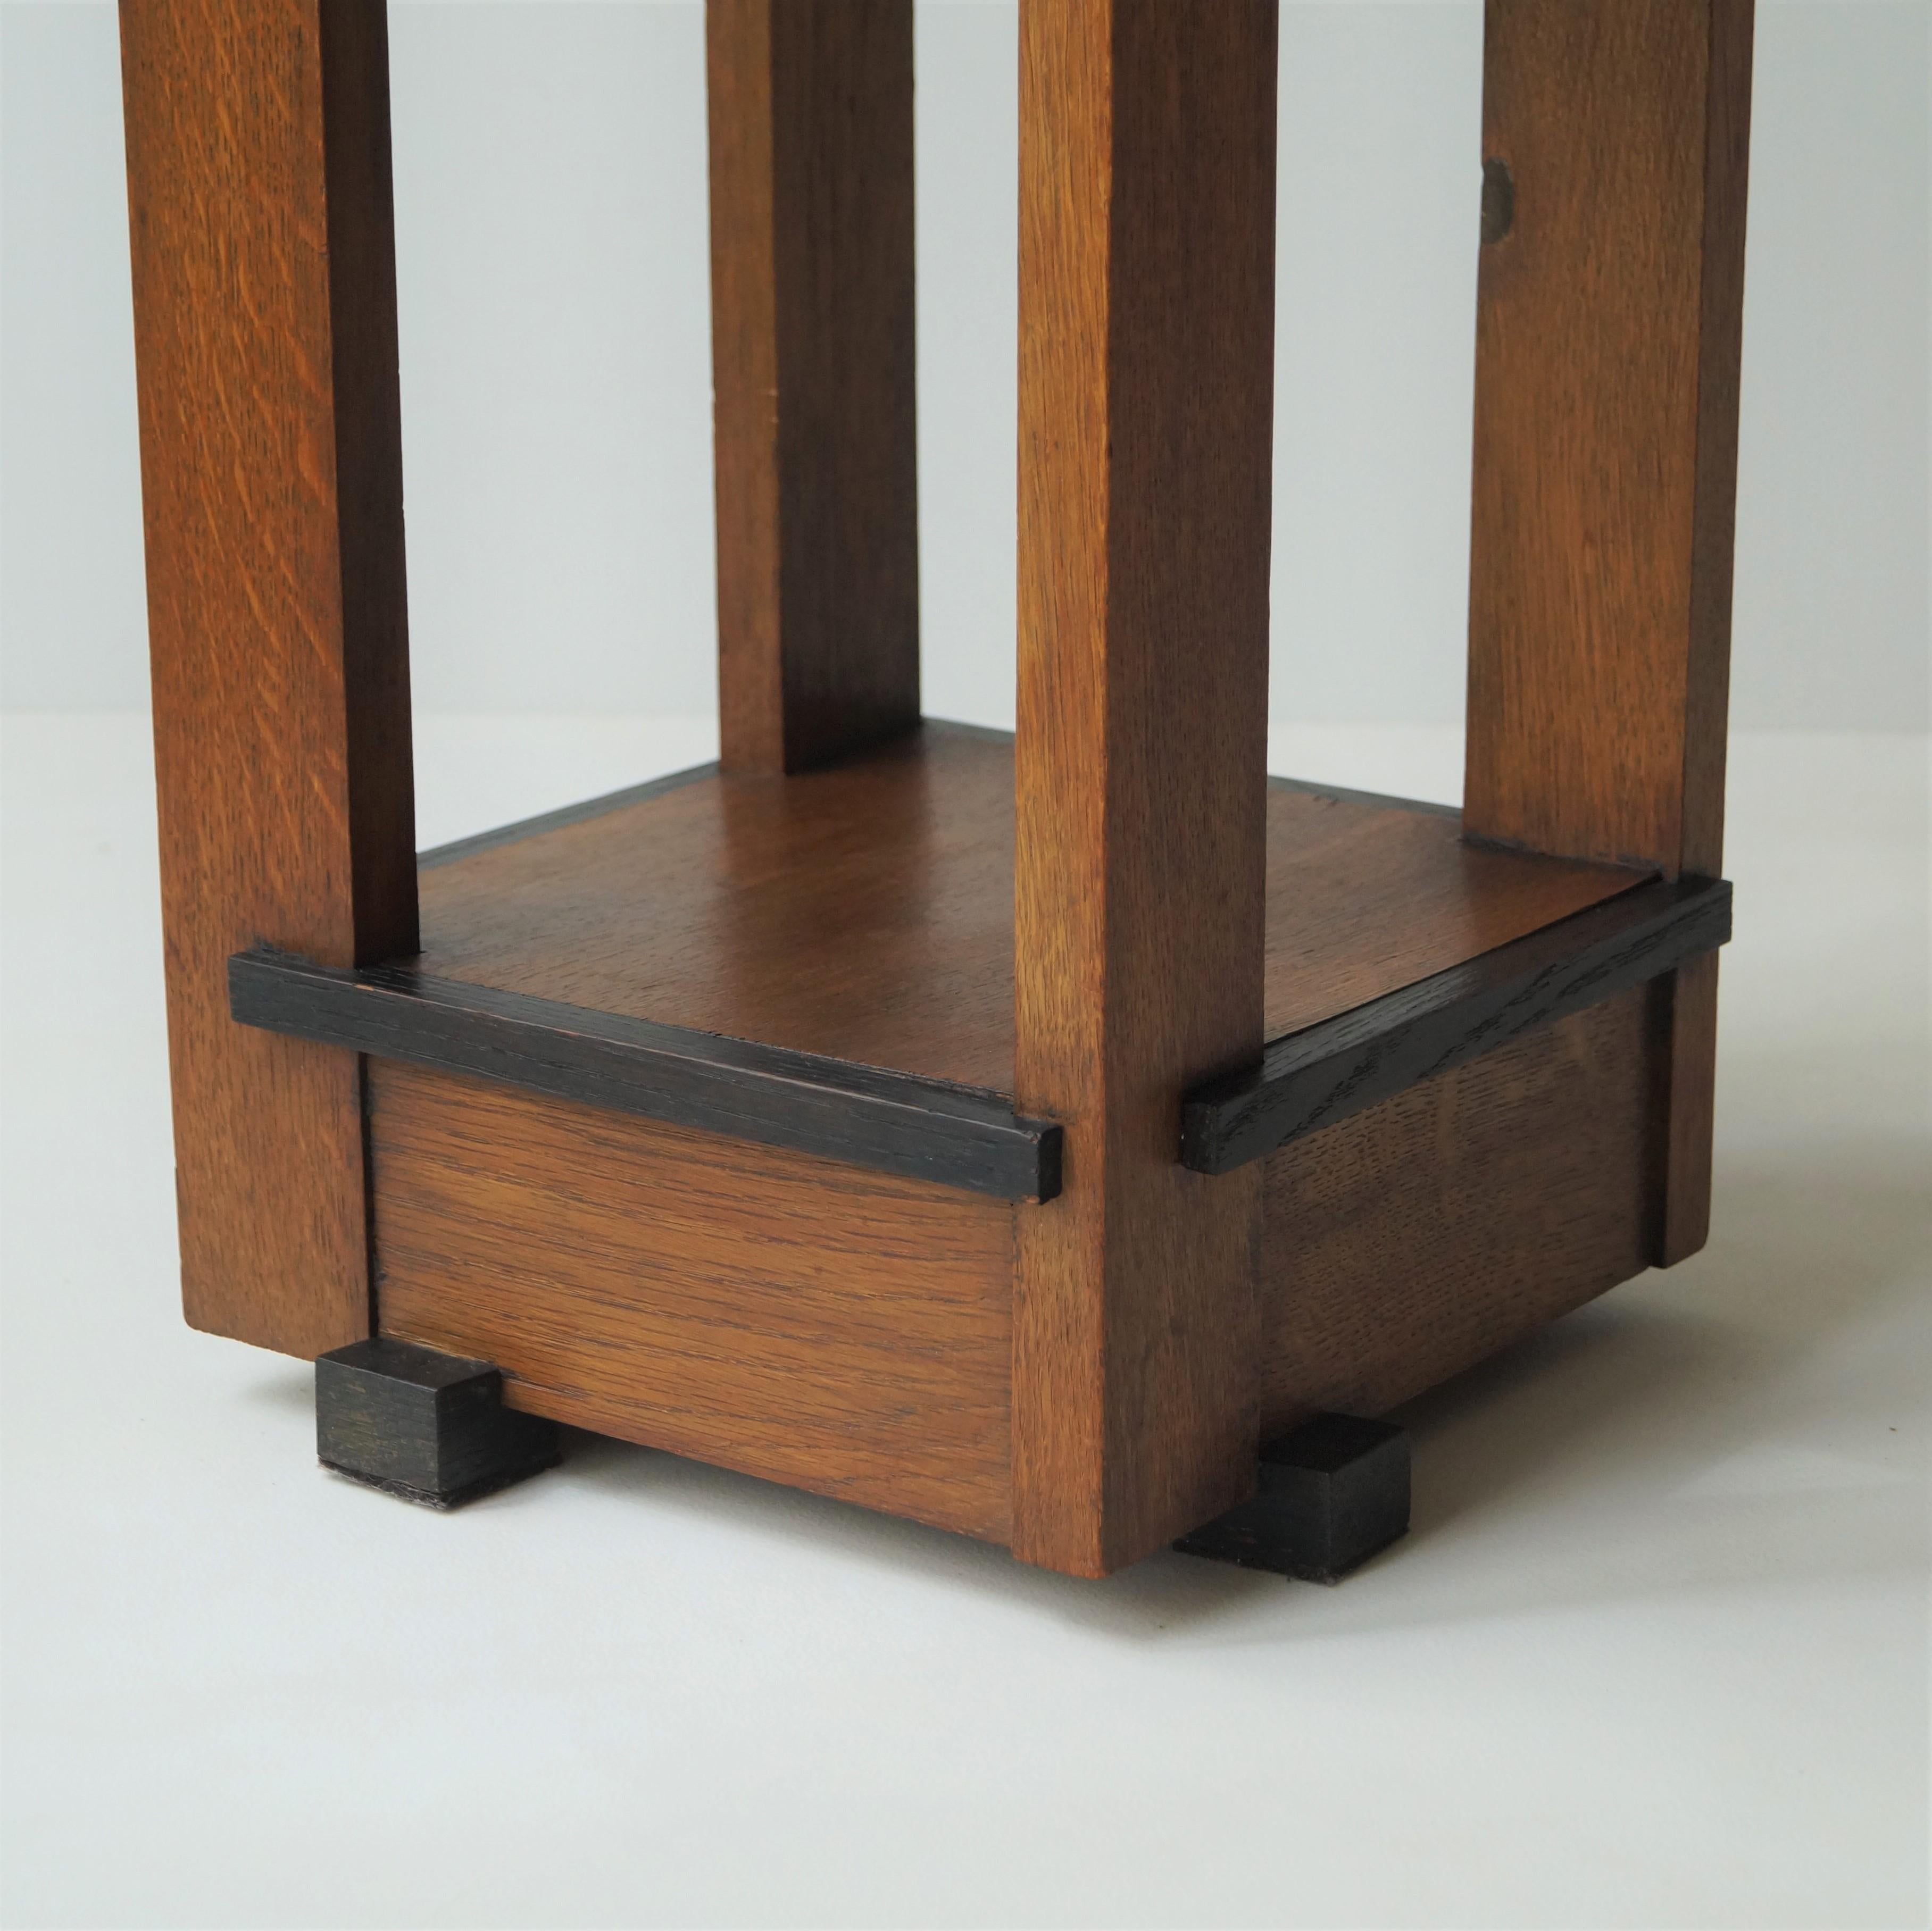 Dutch Art Deco Haagse School side table attributed to Jan Brunott, 1920s For Sale 2